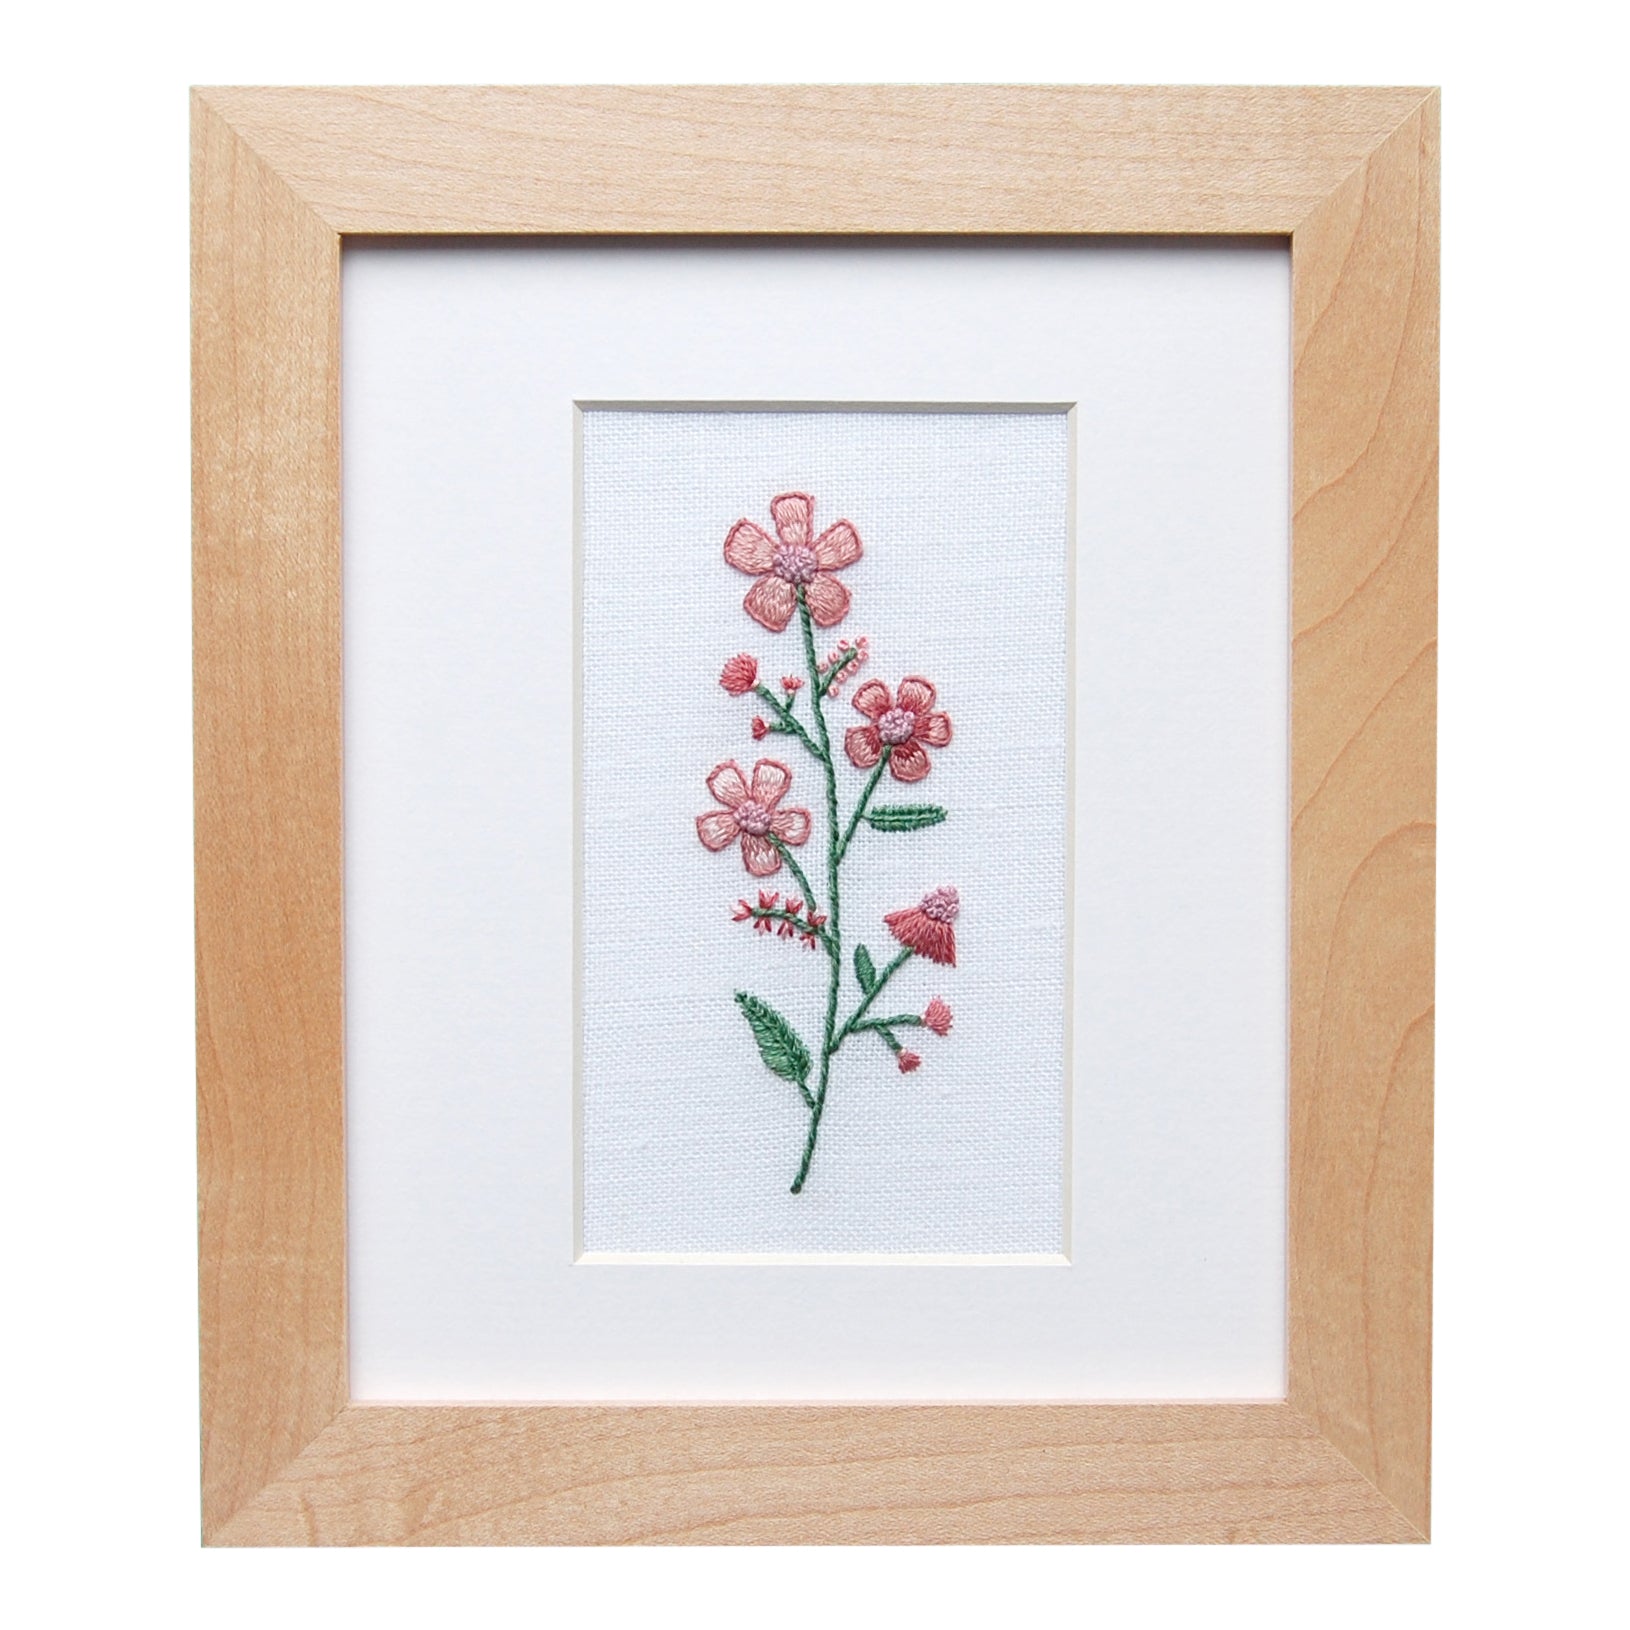 Single Flower in Shades of Pink Hand Embroidered Art